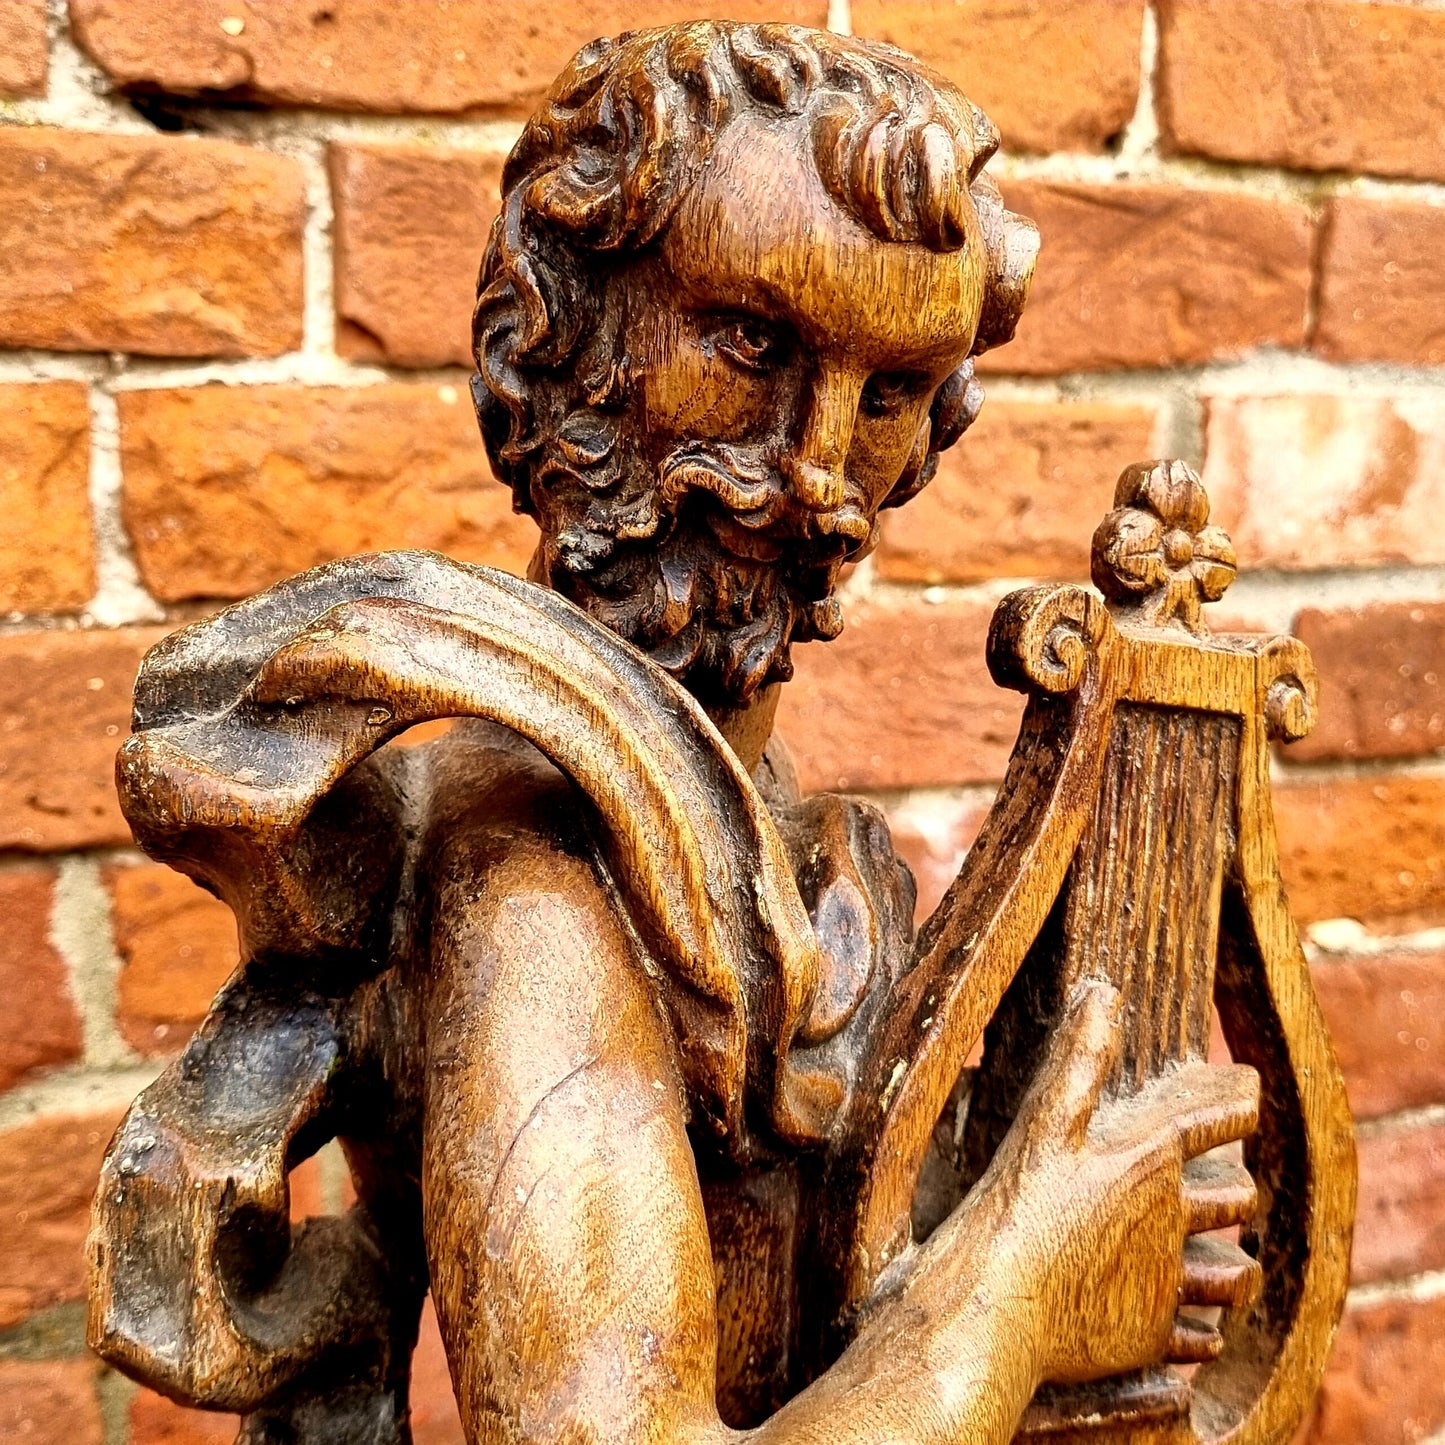 Ex Hurst Collection - Late 17th Century Antique Carved Oak Sculpture of Orpheus With His Lyre